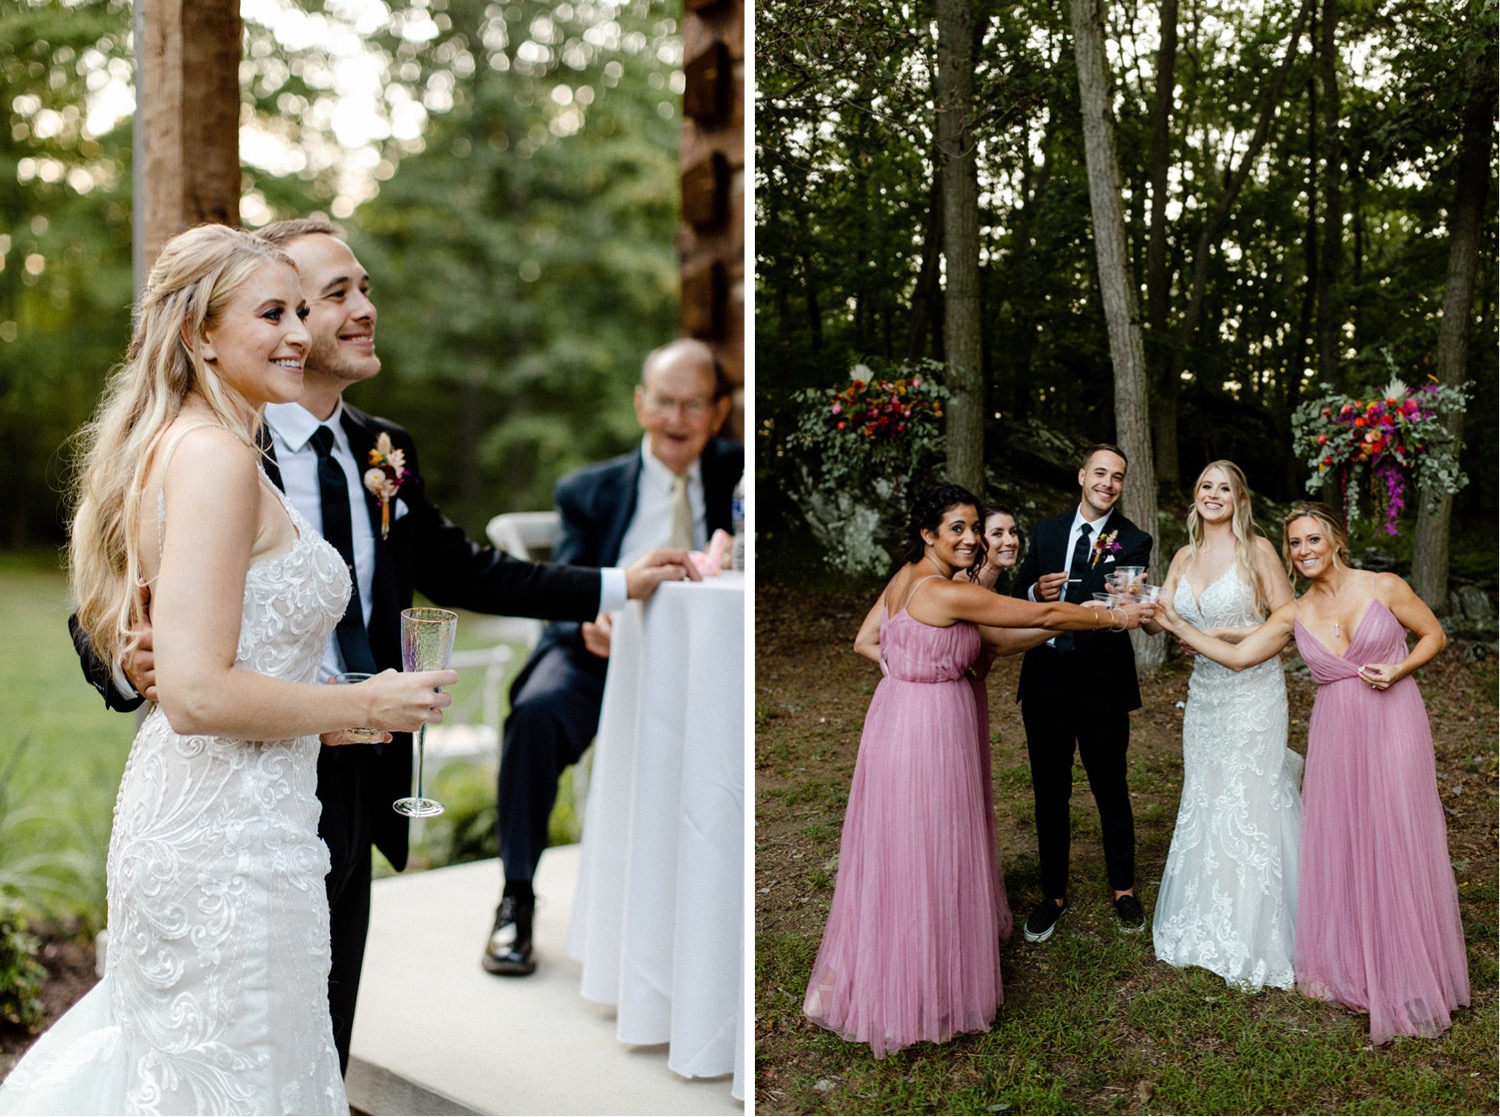 bride and groom greeting guests at wedding reception, taking shot with bridesmaids